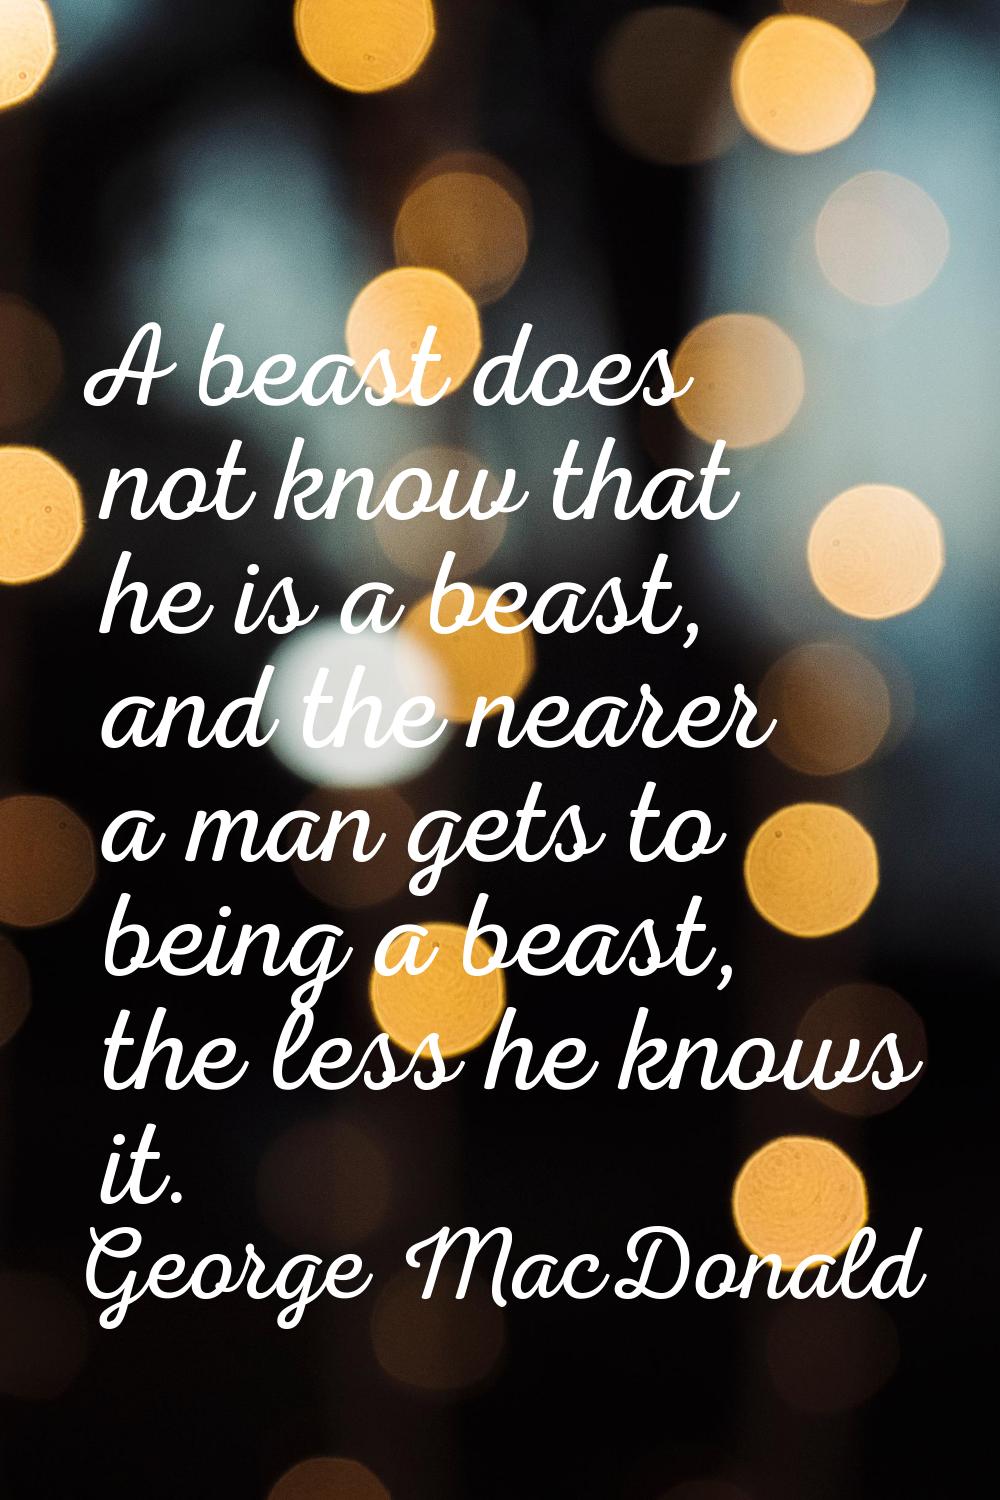 A beast does not know that he is a beast, and the nearer a man gets to being a beast, the less he k